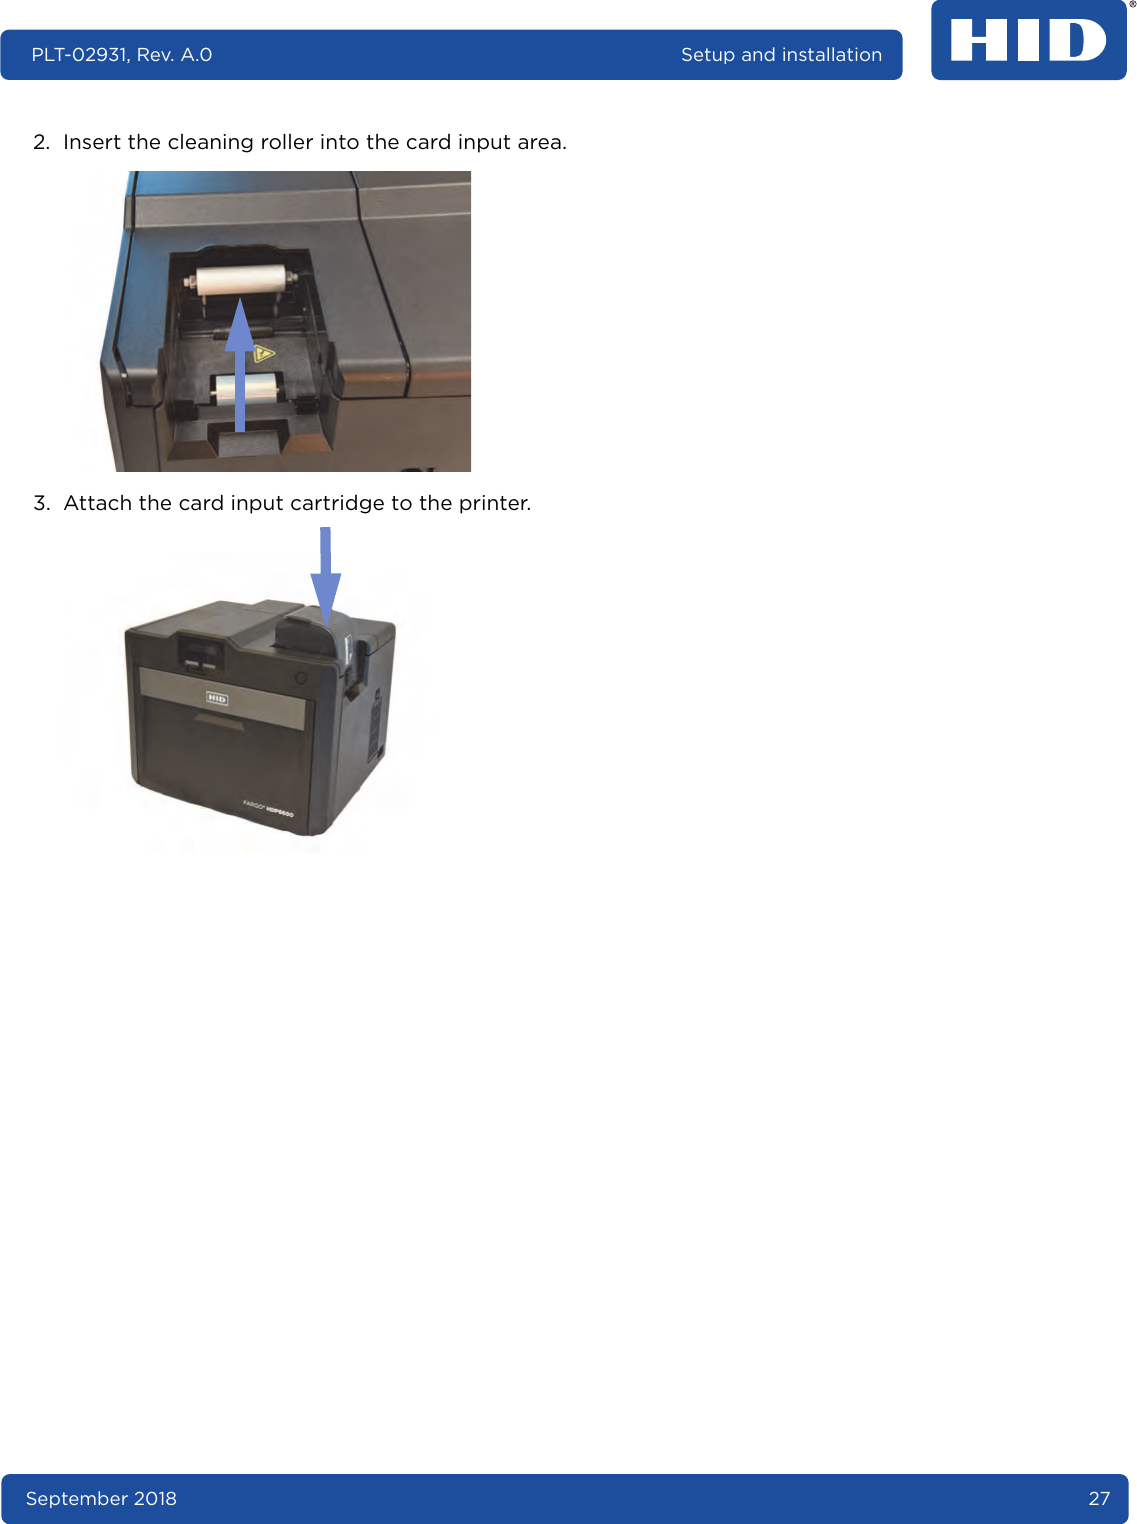 September 2018 27PLT-02931, Rev. A.0 Setup and installation2. Insert the cleaning roller into the card input area. 3. Attach the card input cartridge to the printer. 